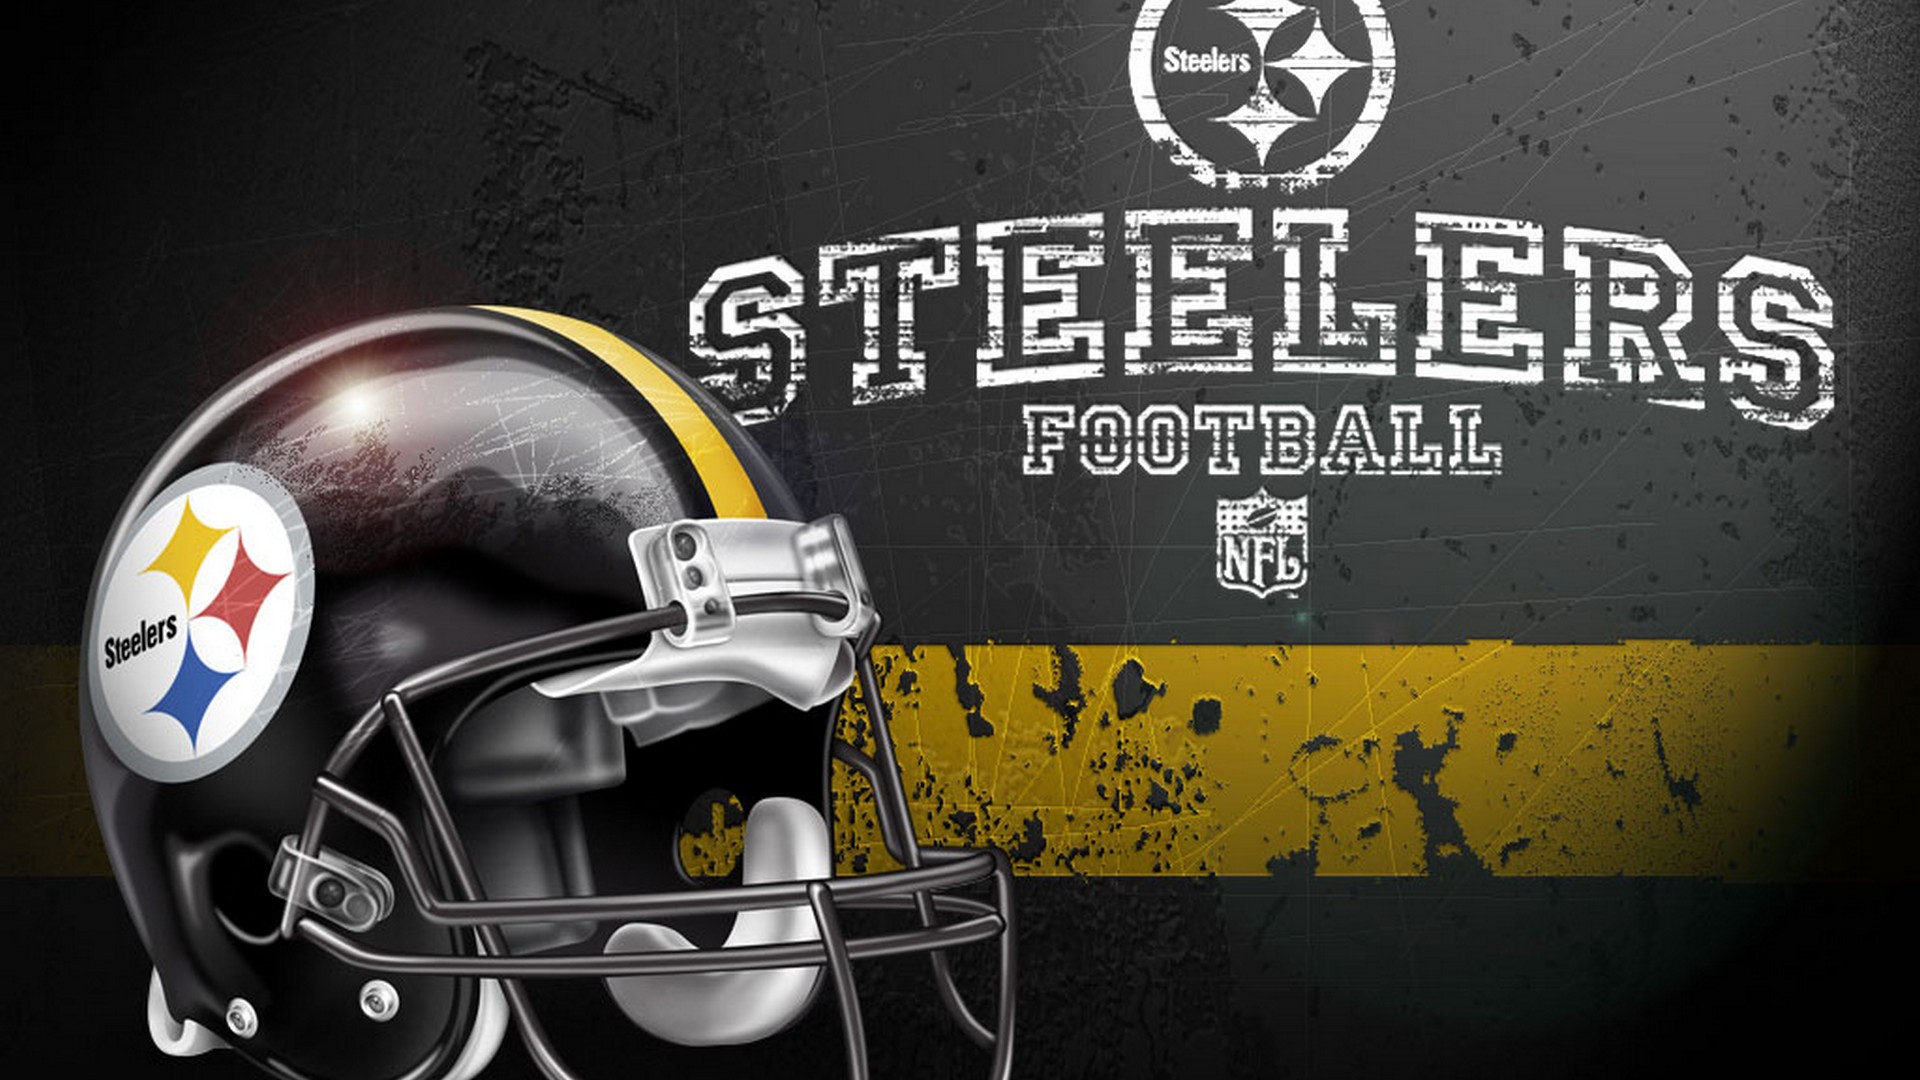 Wallpapers HD Steelers With Resolution 1920X1080 pixel. You can make this wallpaper for your Mac or Windows Desktop Background, iPhone, Android or Tablet and another Smartphone device for free